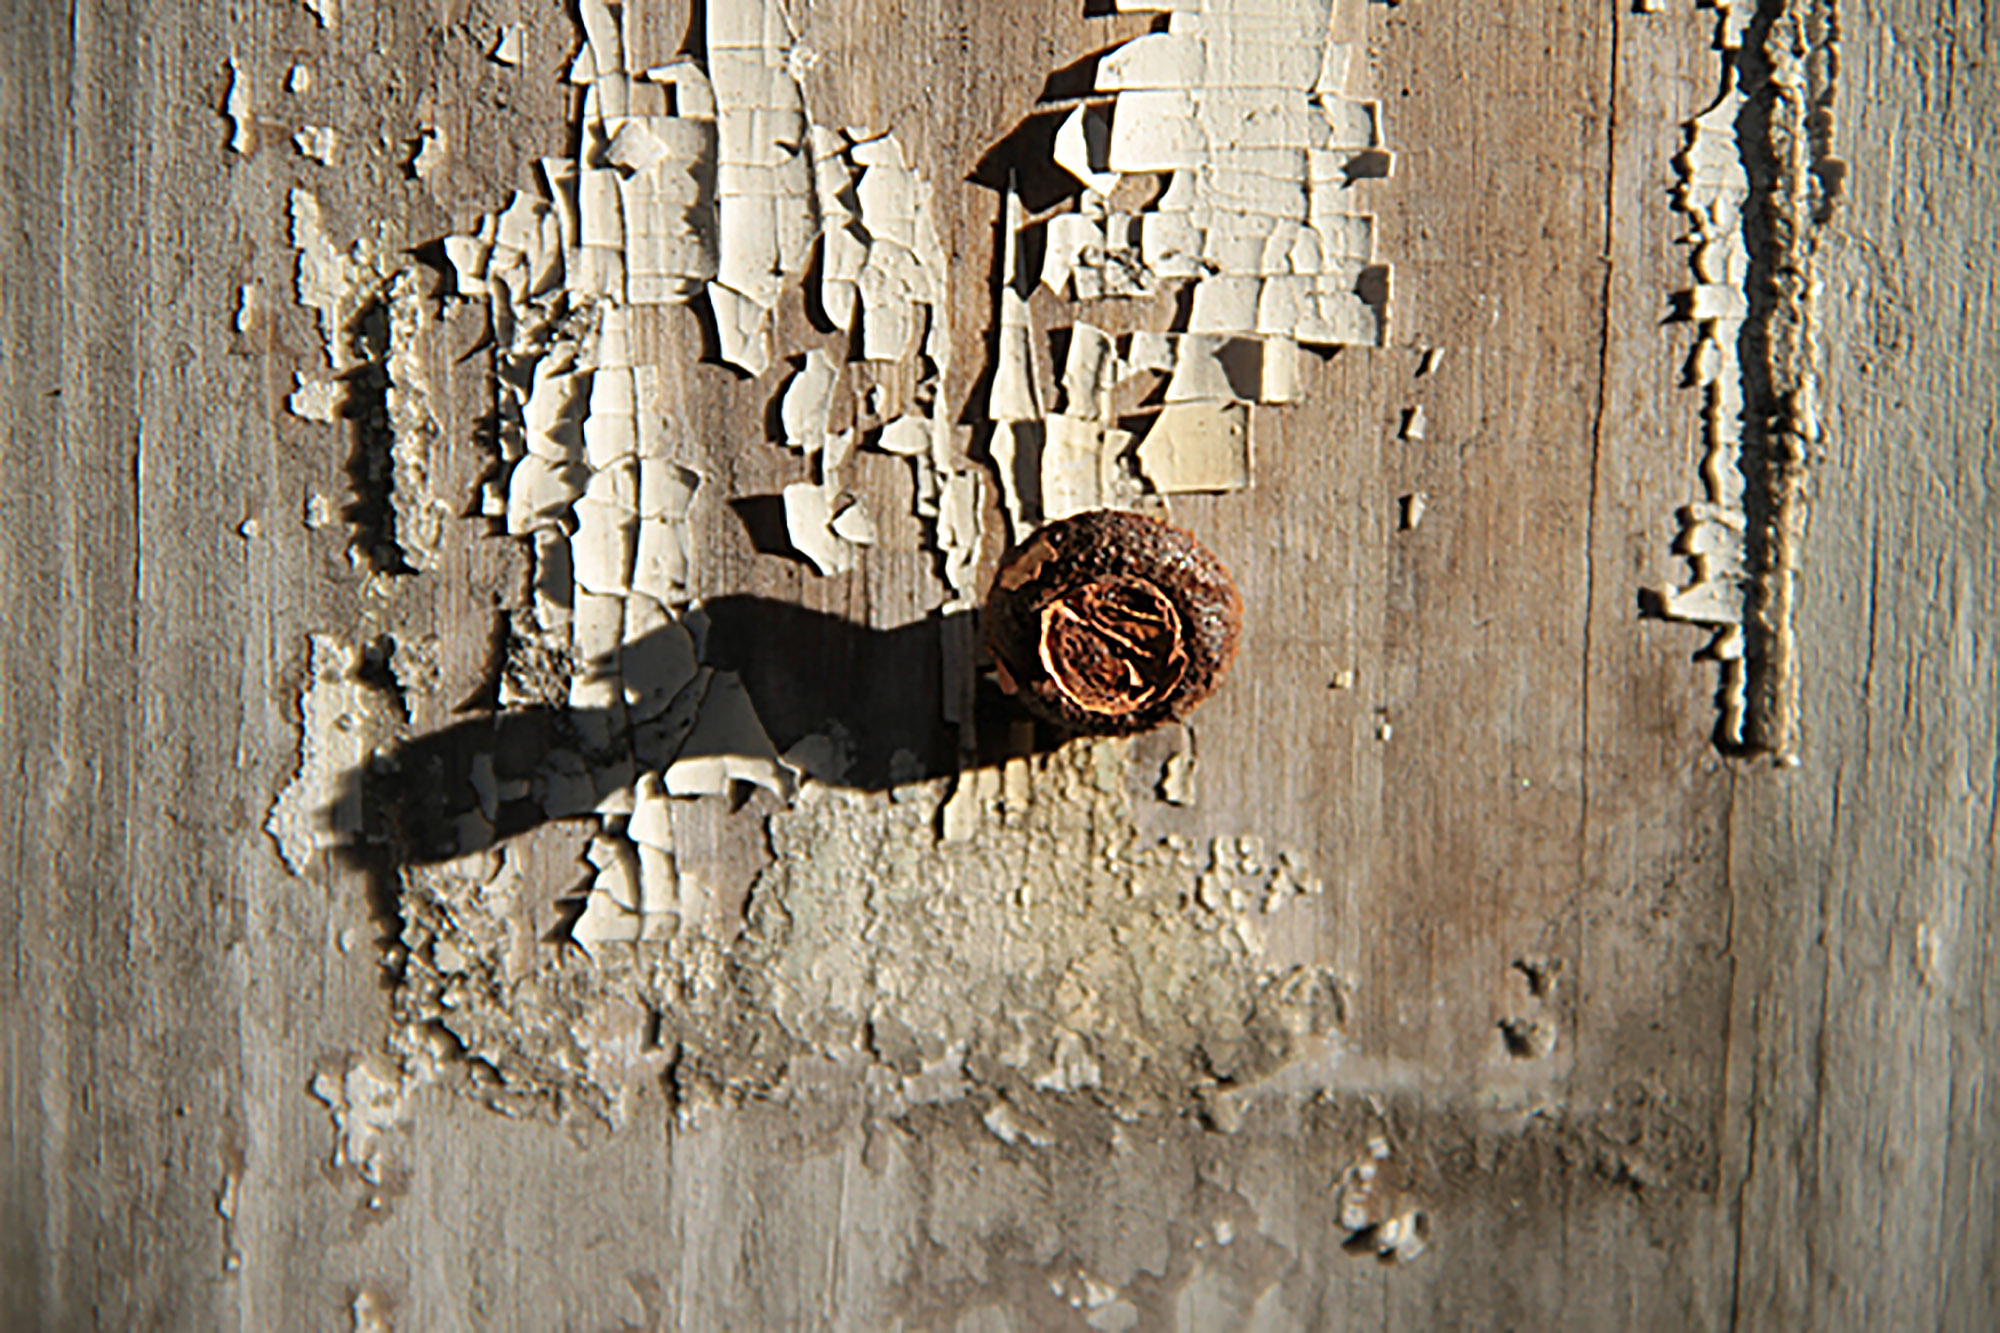 Rusty nail and peeling old paint